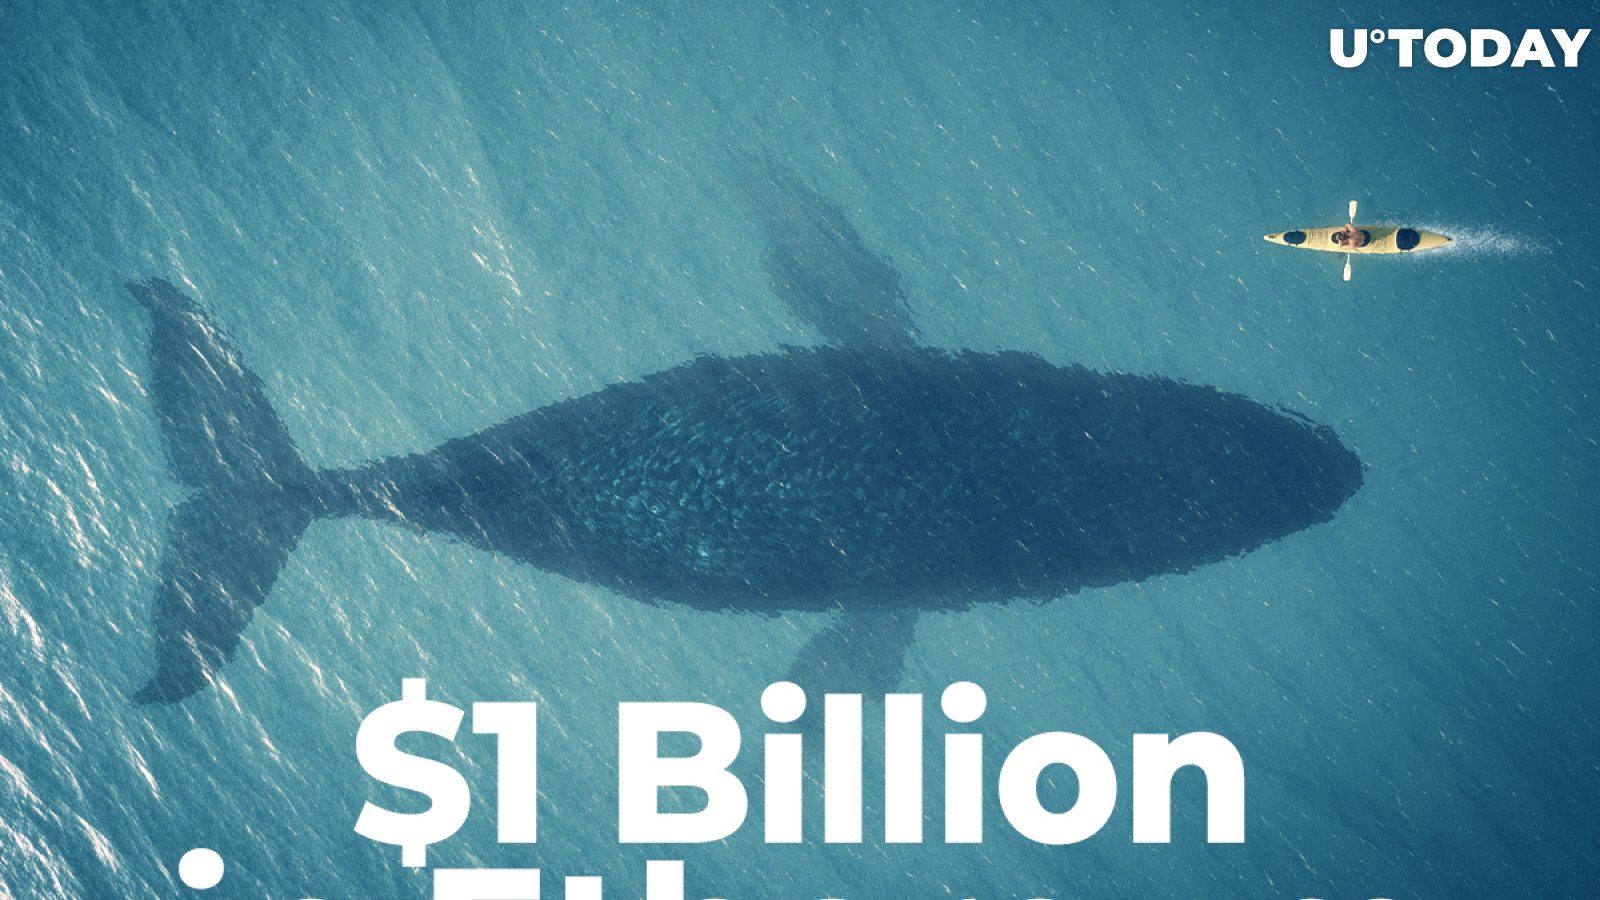 Crypto Whales Move $1 Billion in Ethereum, While ETH Open Interest Soars to $8 Billion